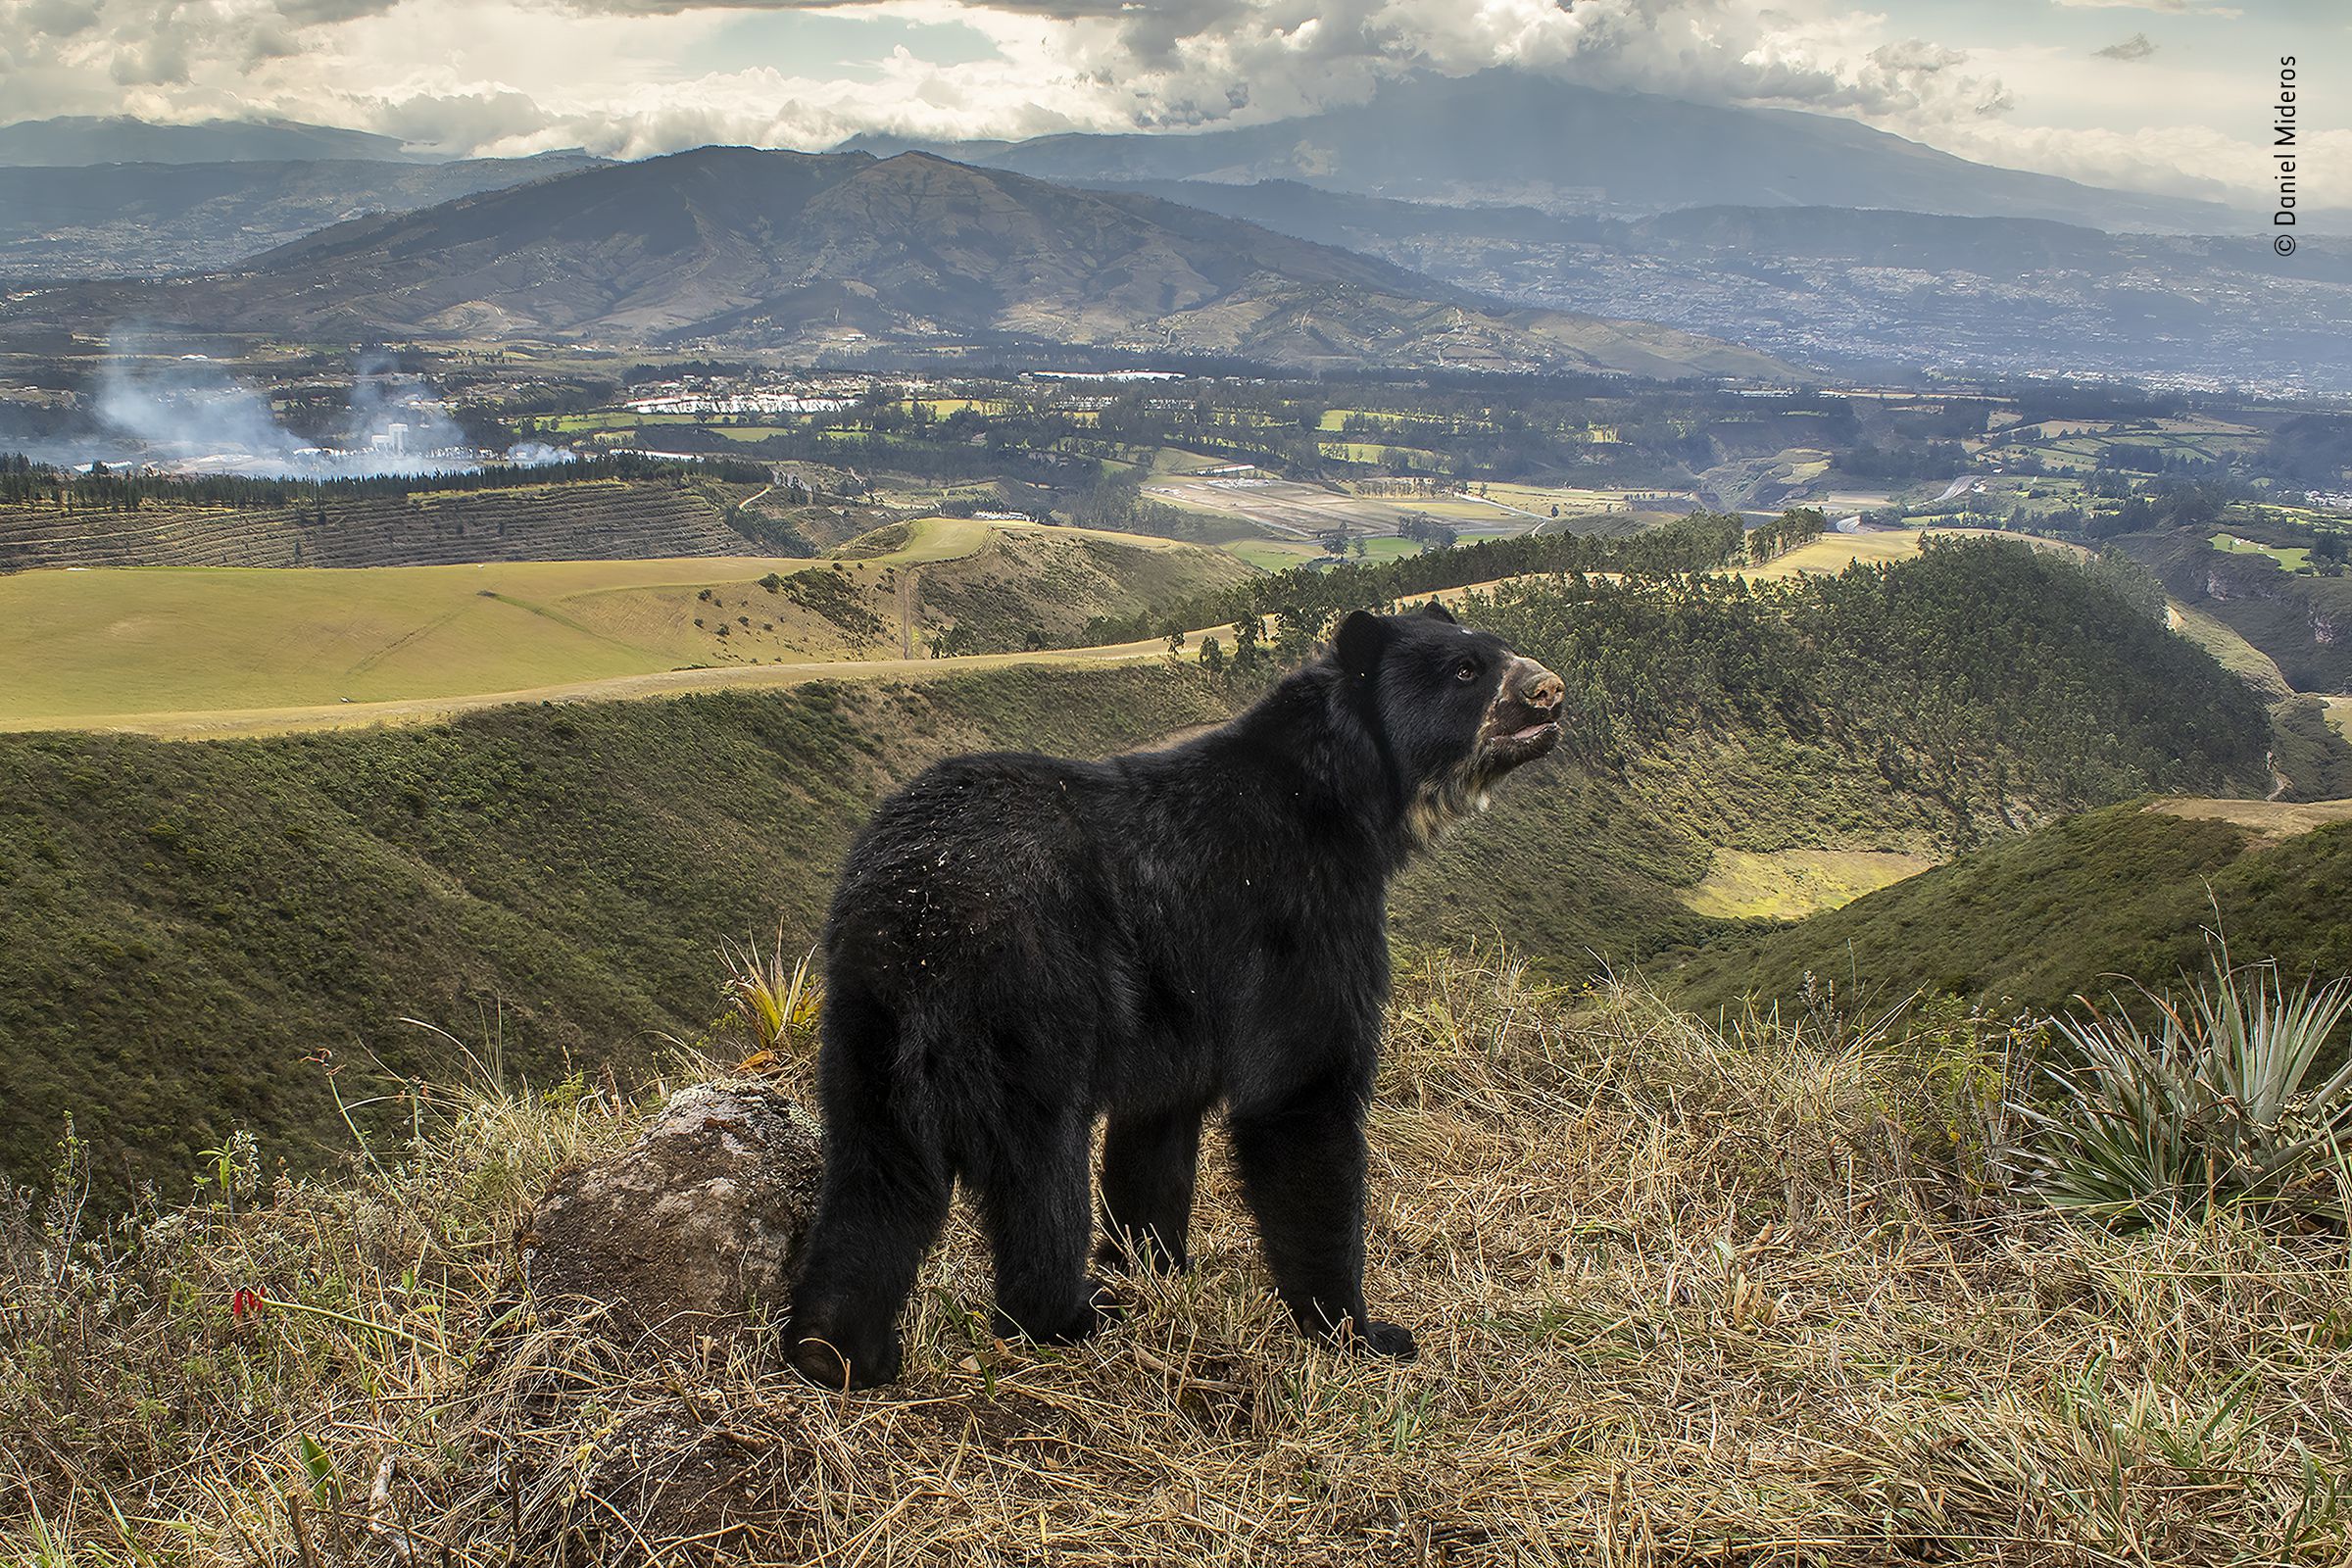 A spectacled bear gazes down upon the deforested hillsides, farming terraces, and the city’s urban sprawl.